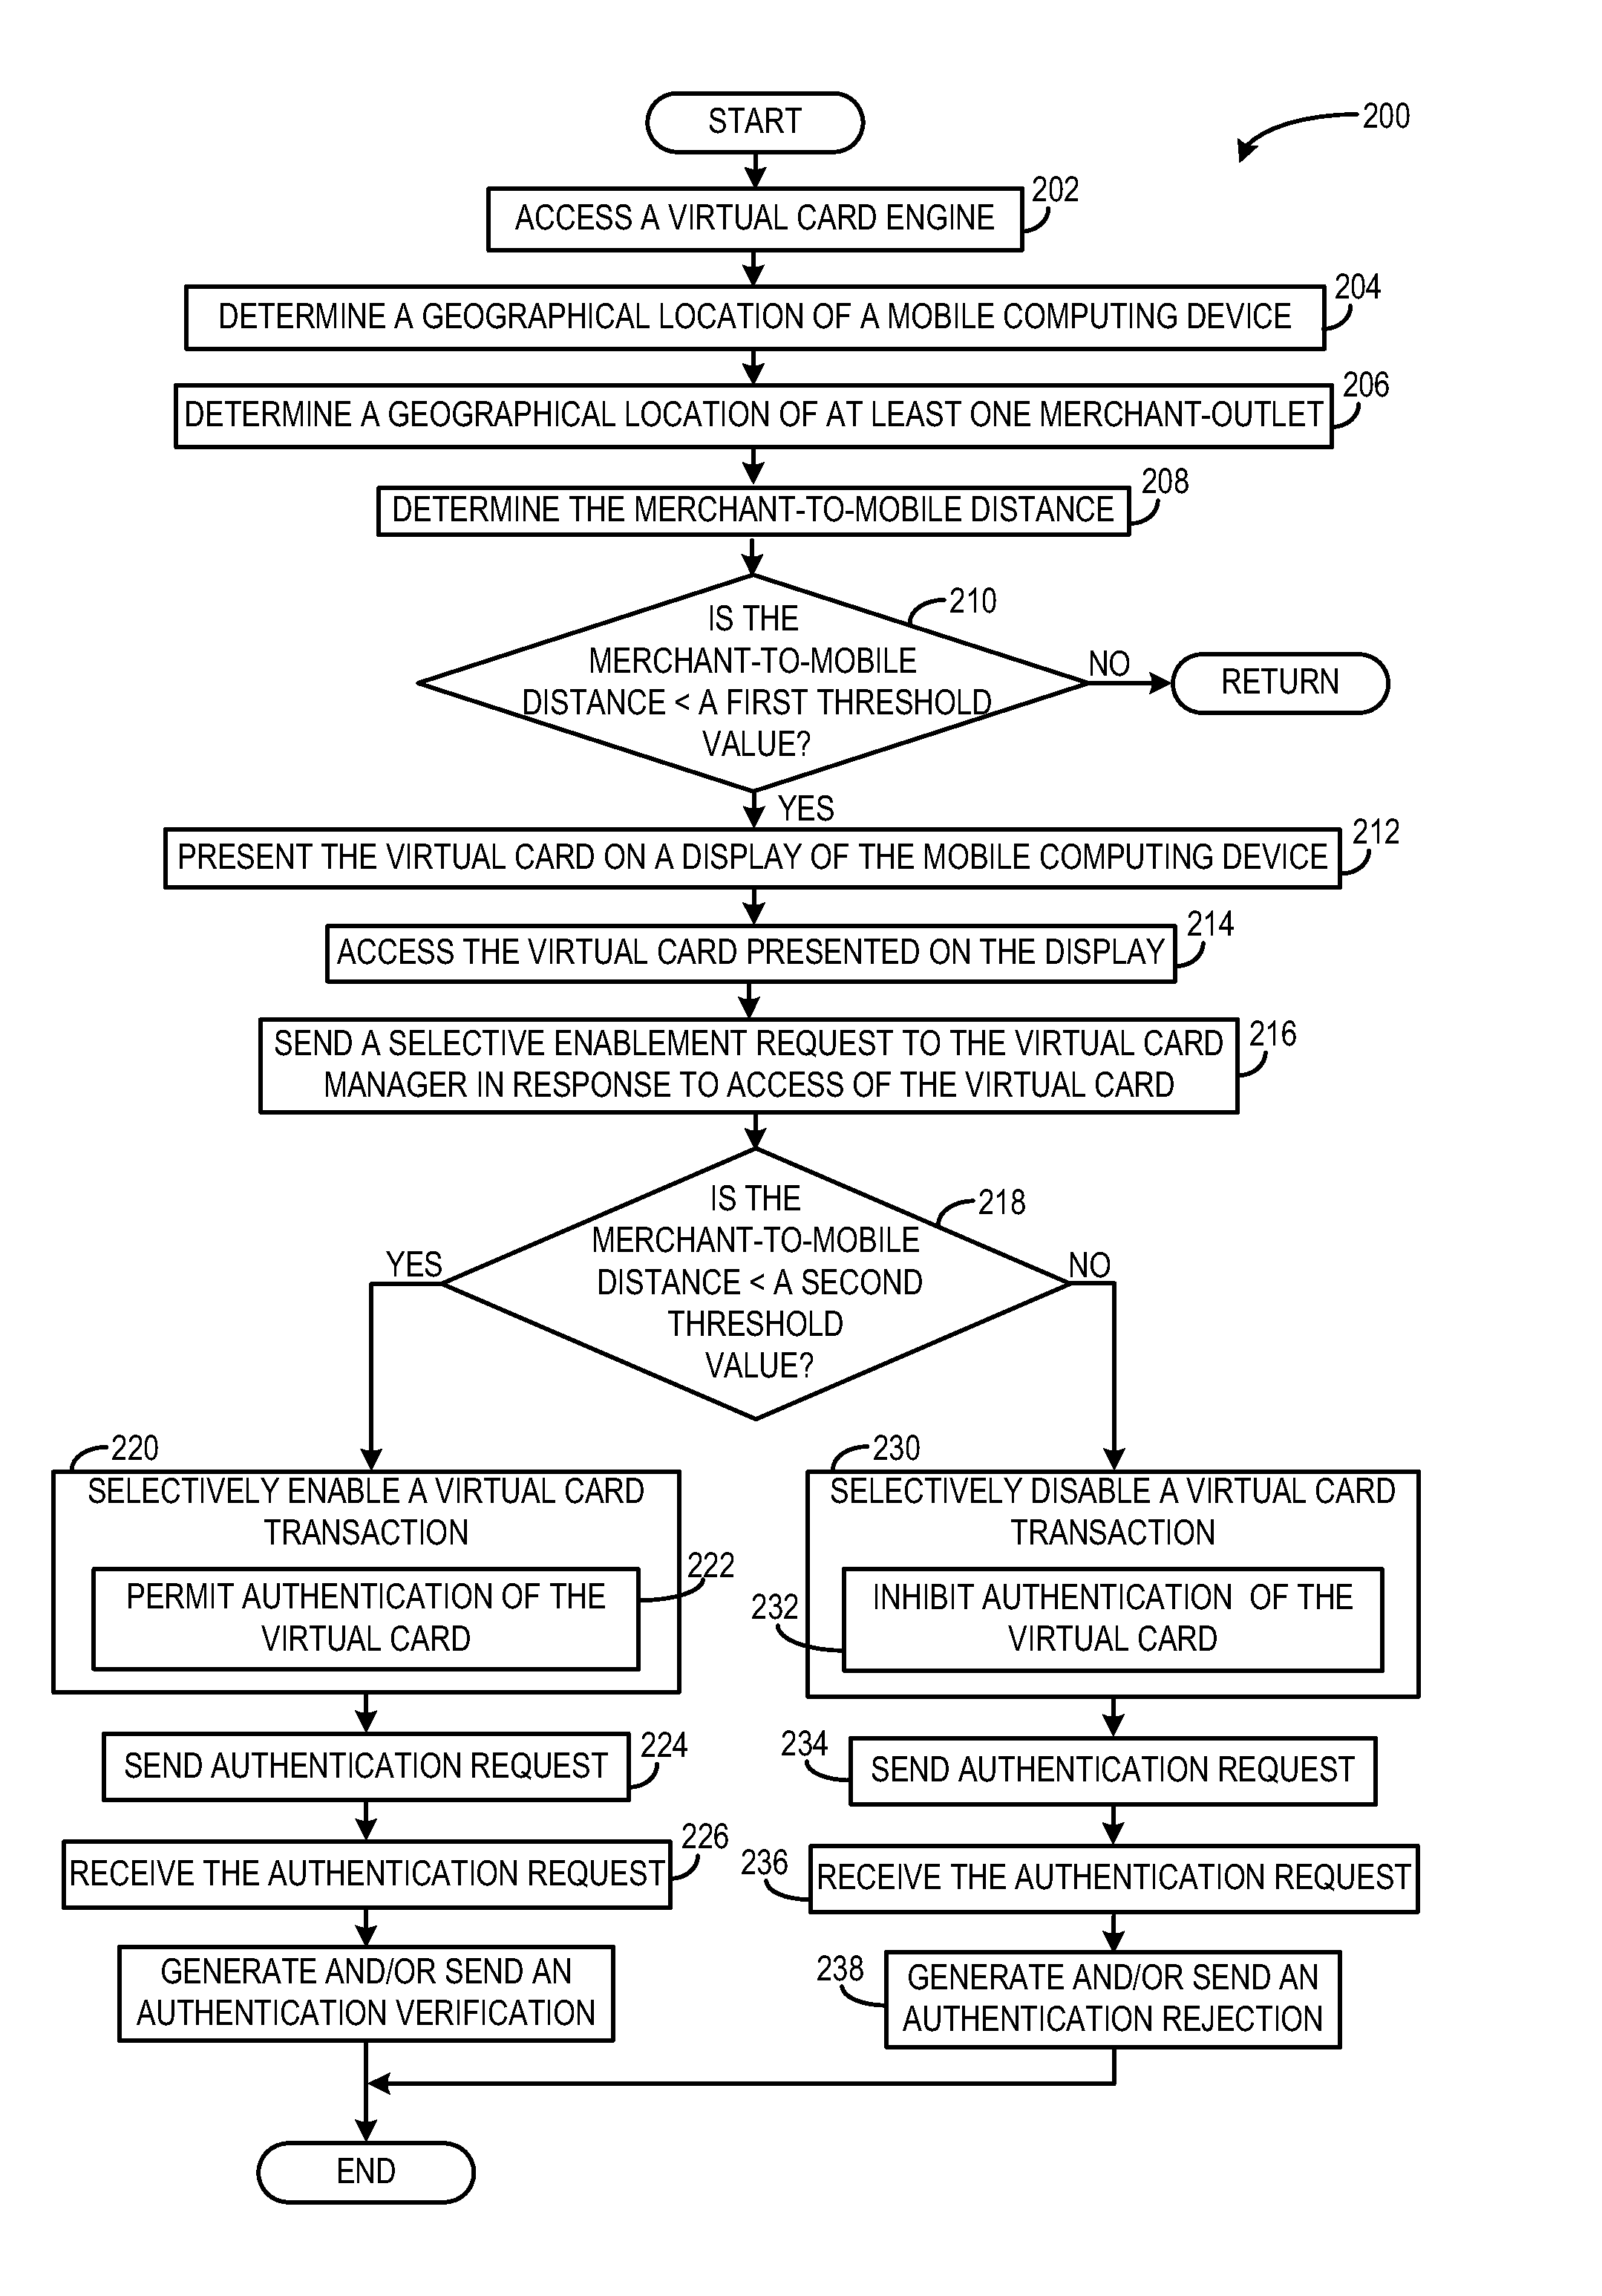 Systems and methods for managing a virtual card based on geographical information